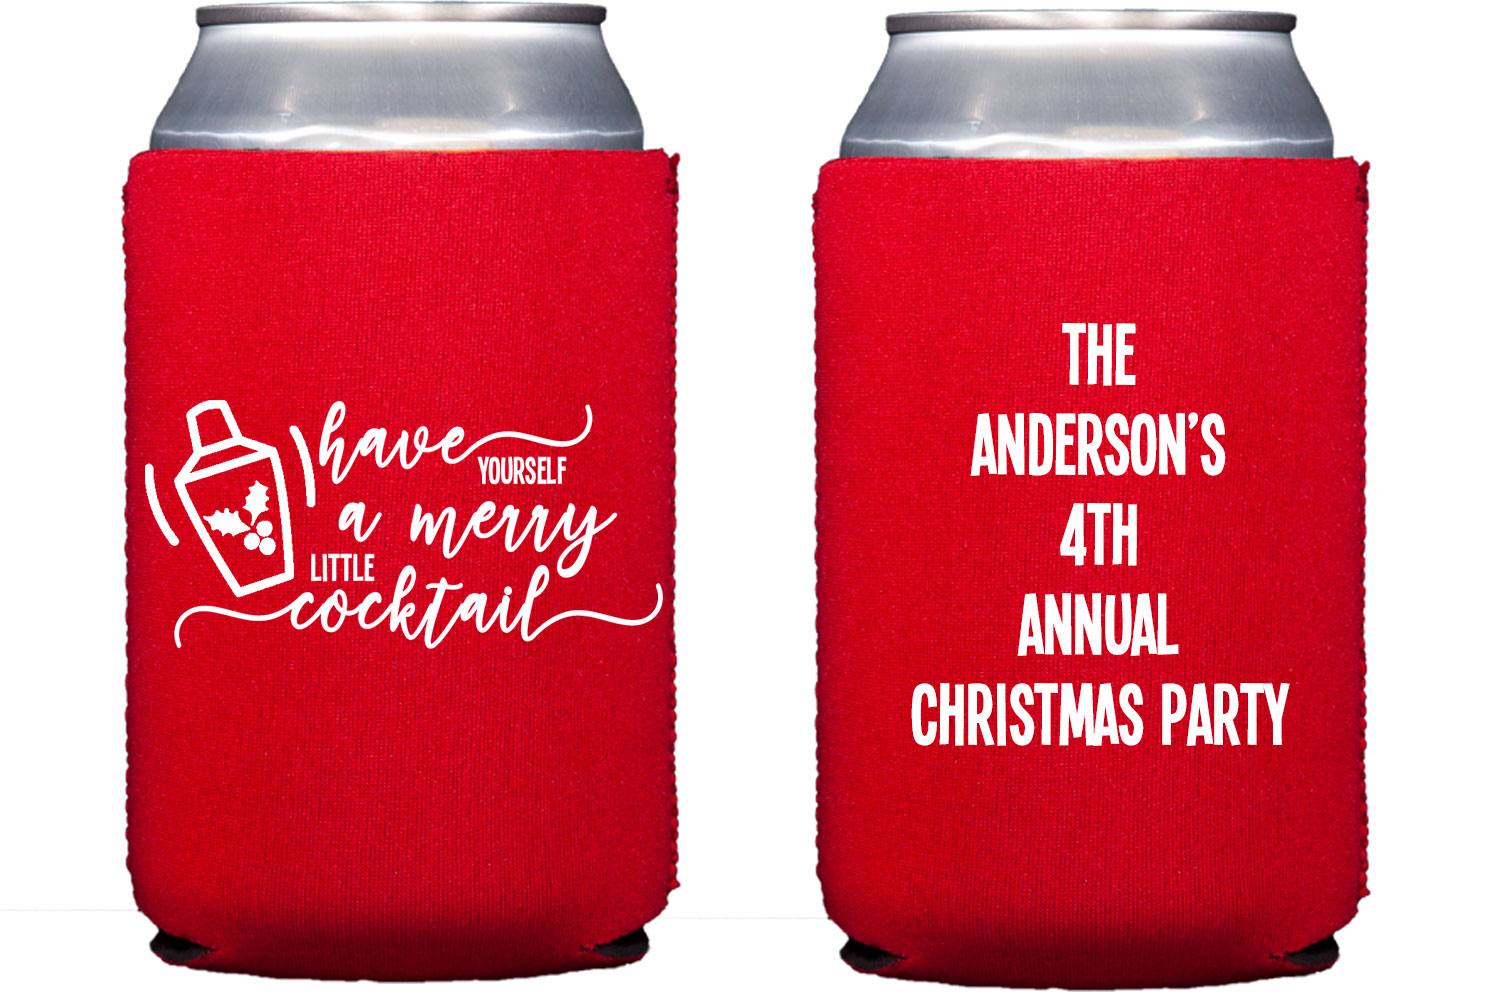 https://www.twofunnygirls.com/wp-content/uploads/2020/05/Custom-Printed-Cane-Koozie-Christmas-Beer-Can-Koozie-Have-Yourself-A-Merry-Little-Cocktail.jpg